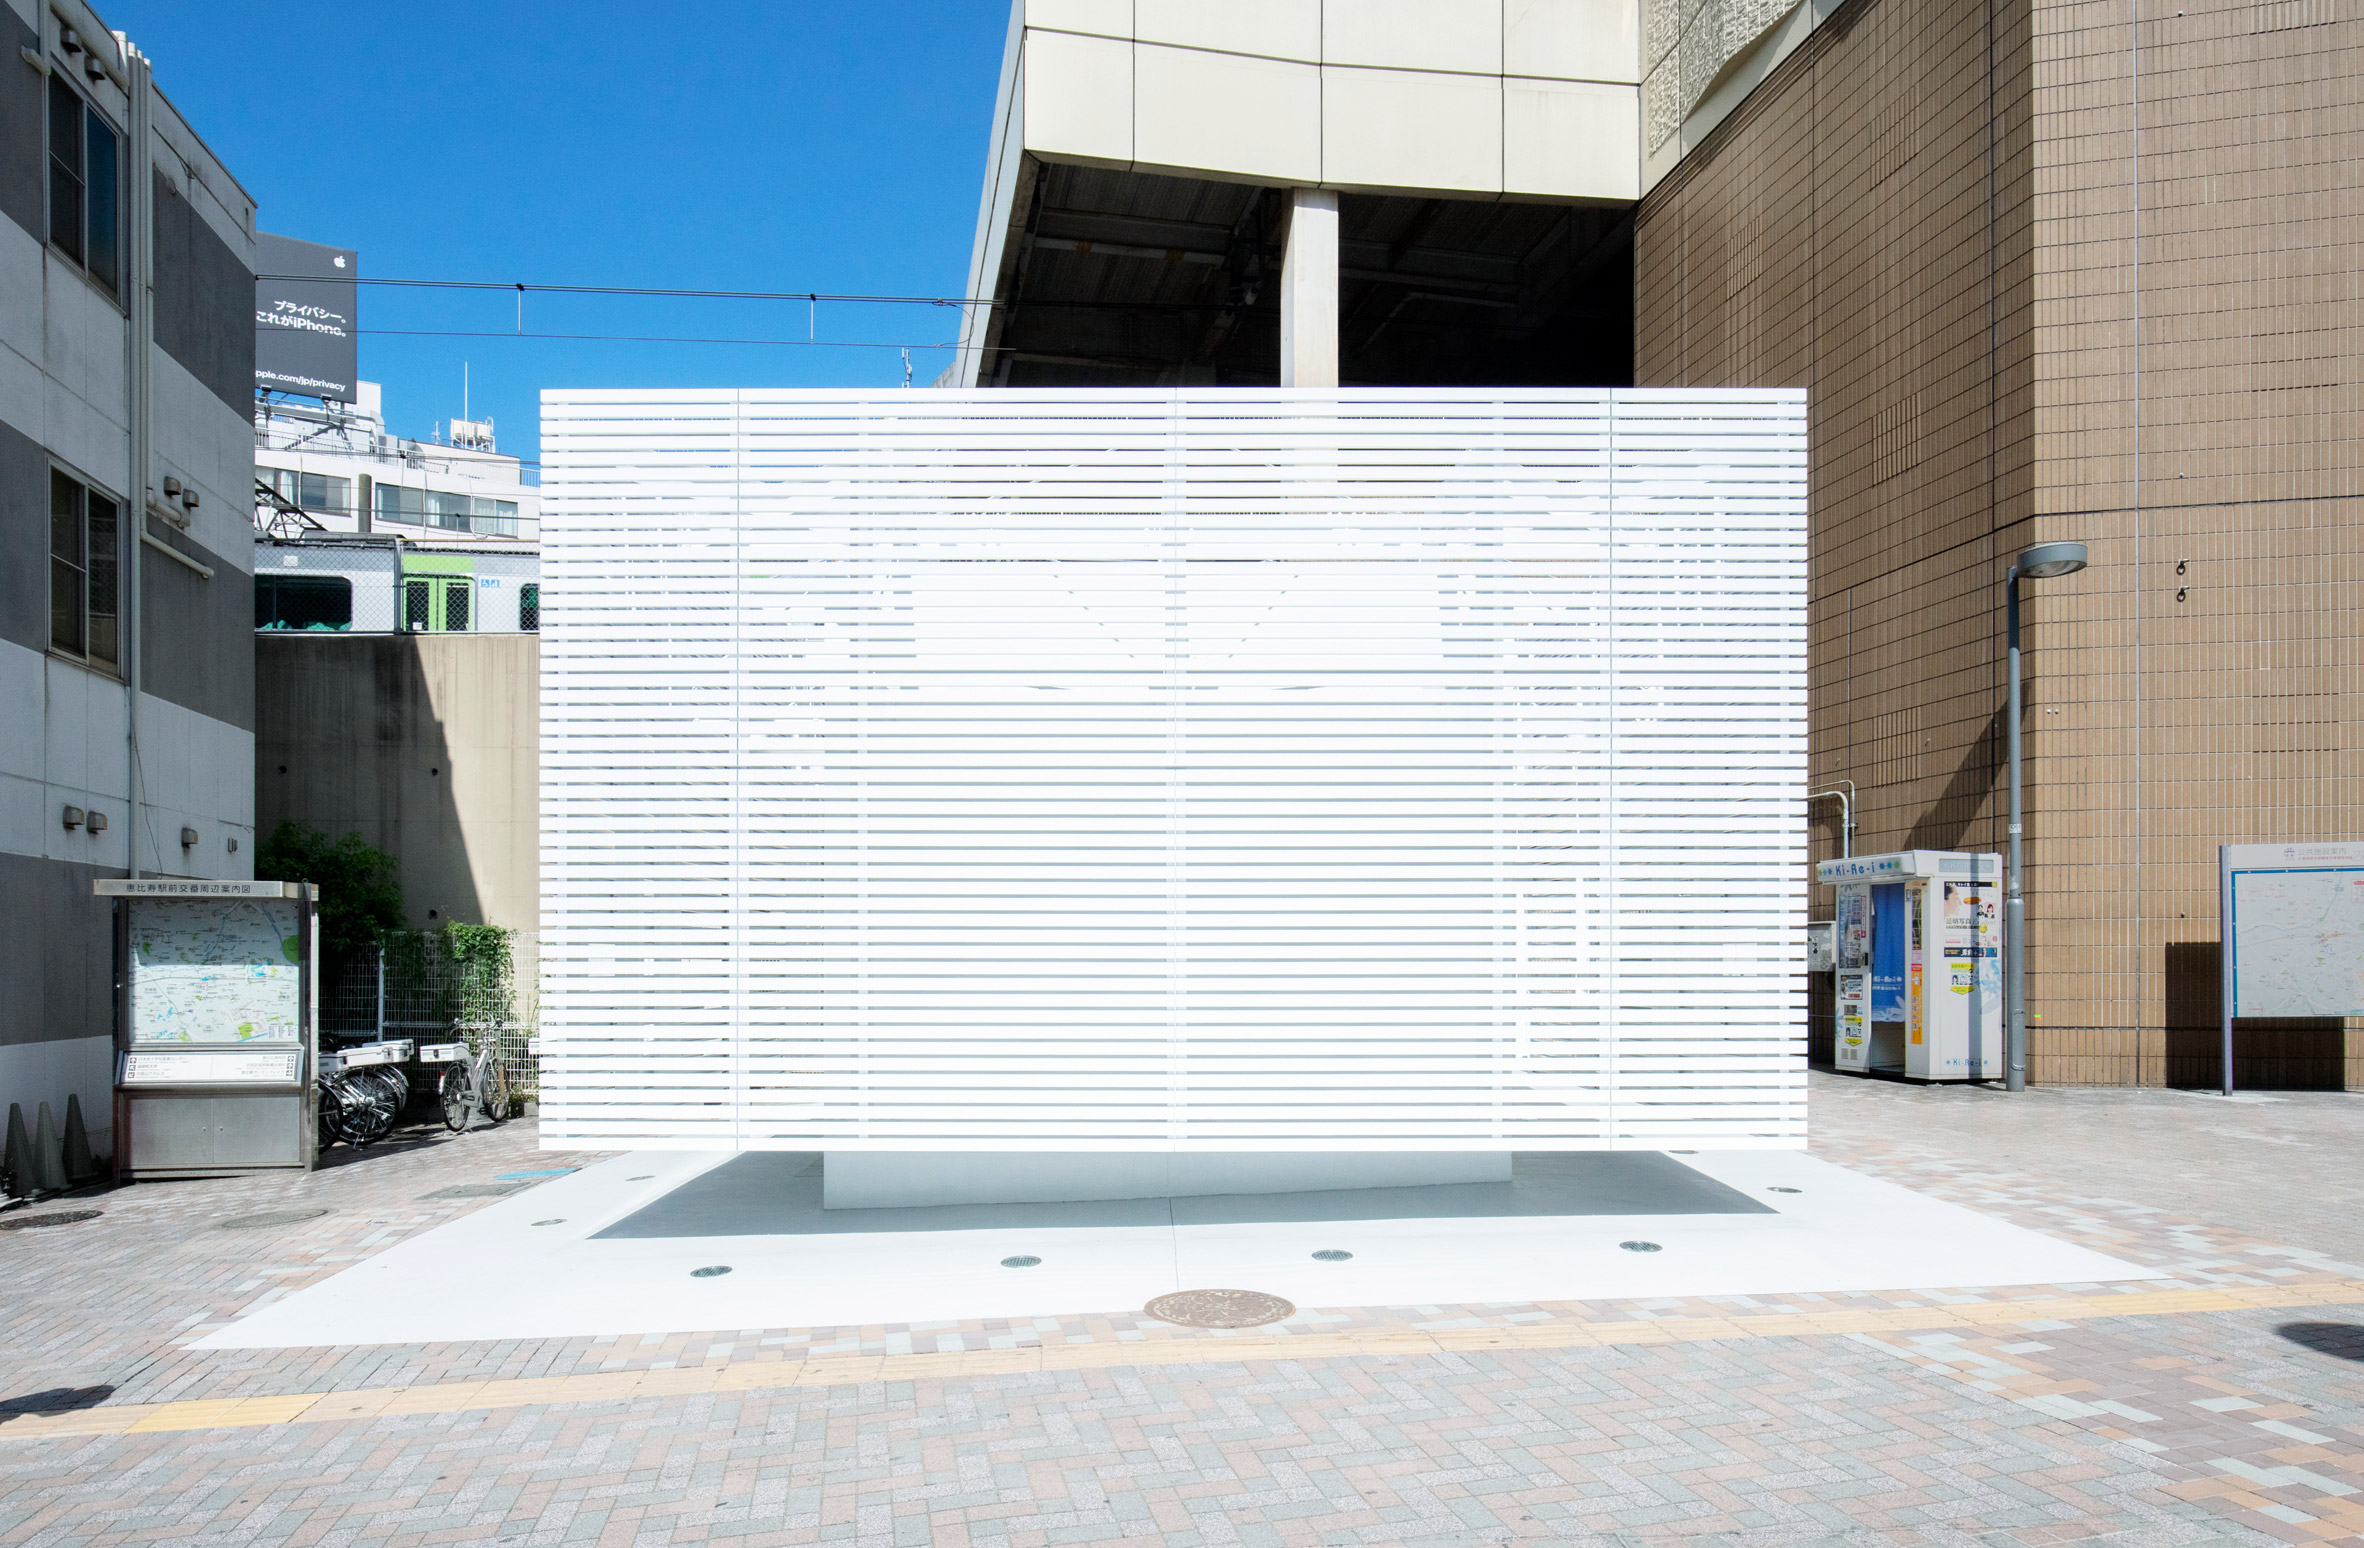 Toilet block wrapped in white louvres